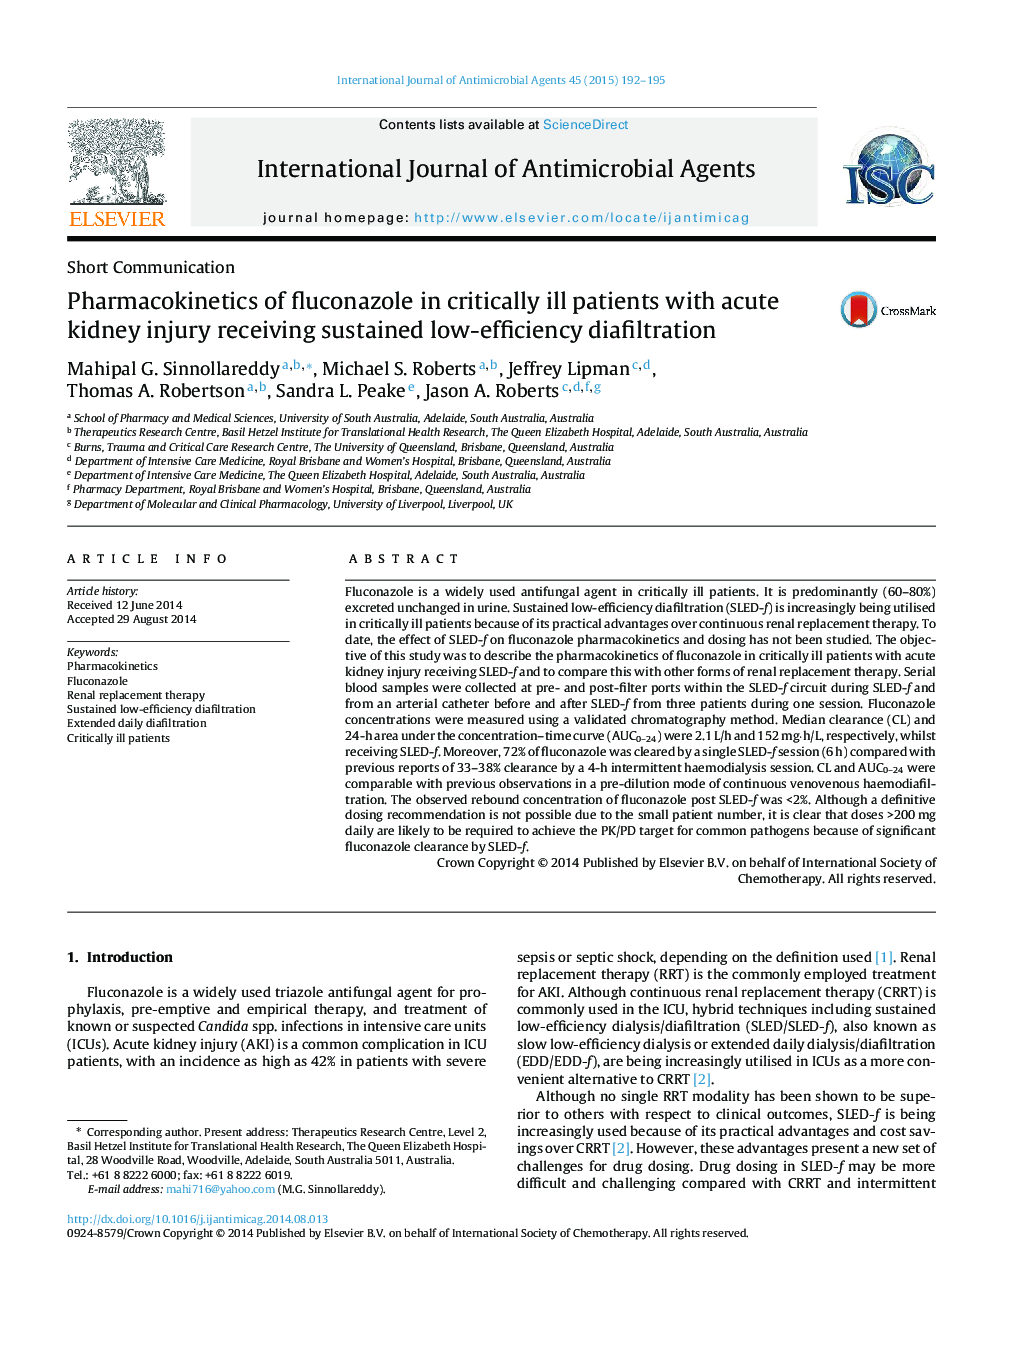 Pharmacokinetics of fluconazole in critically ill patients with acute kidney injury receiving sustained low-efficiency diafiltration